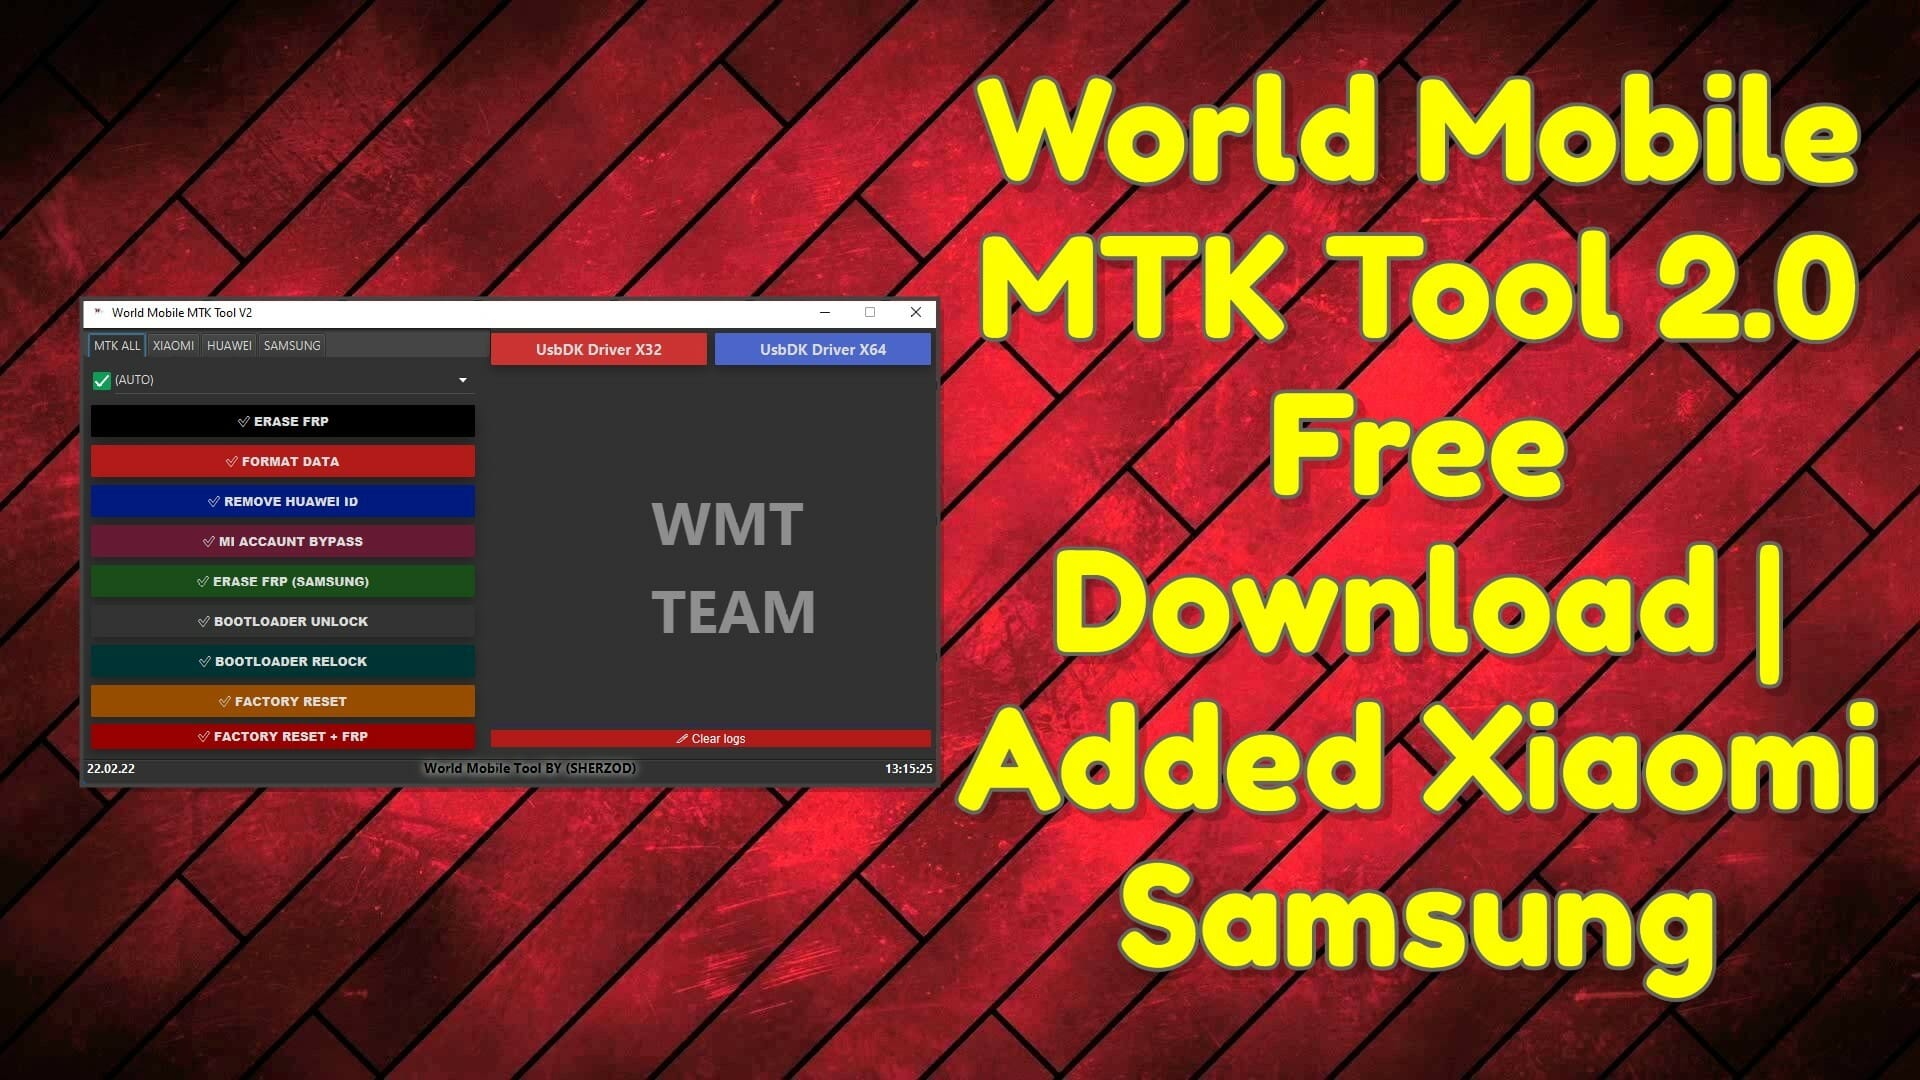 World Mobile MTK Tool 2.0 Free Download _ Added Xiaomi Samsung